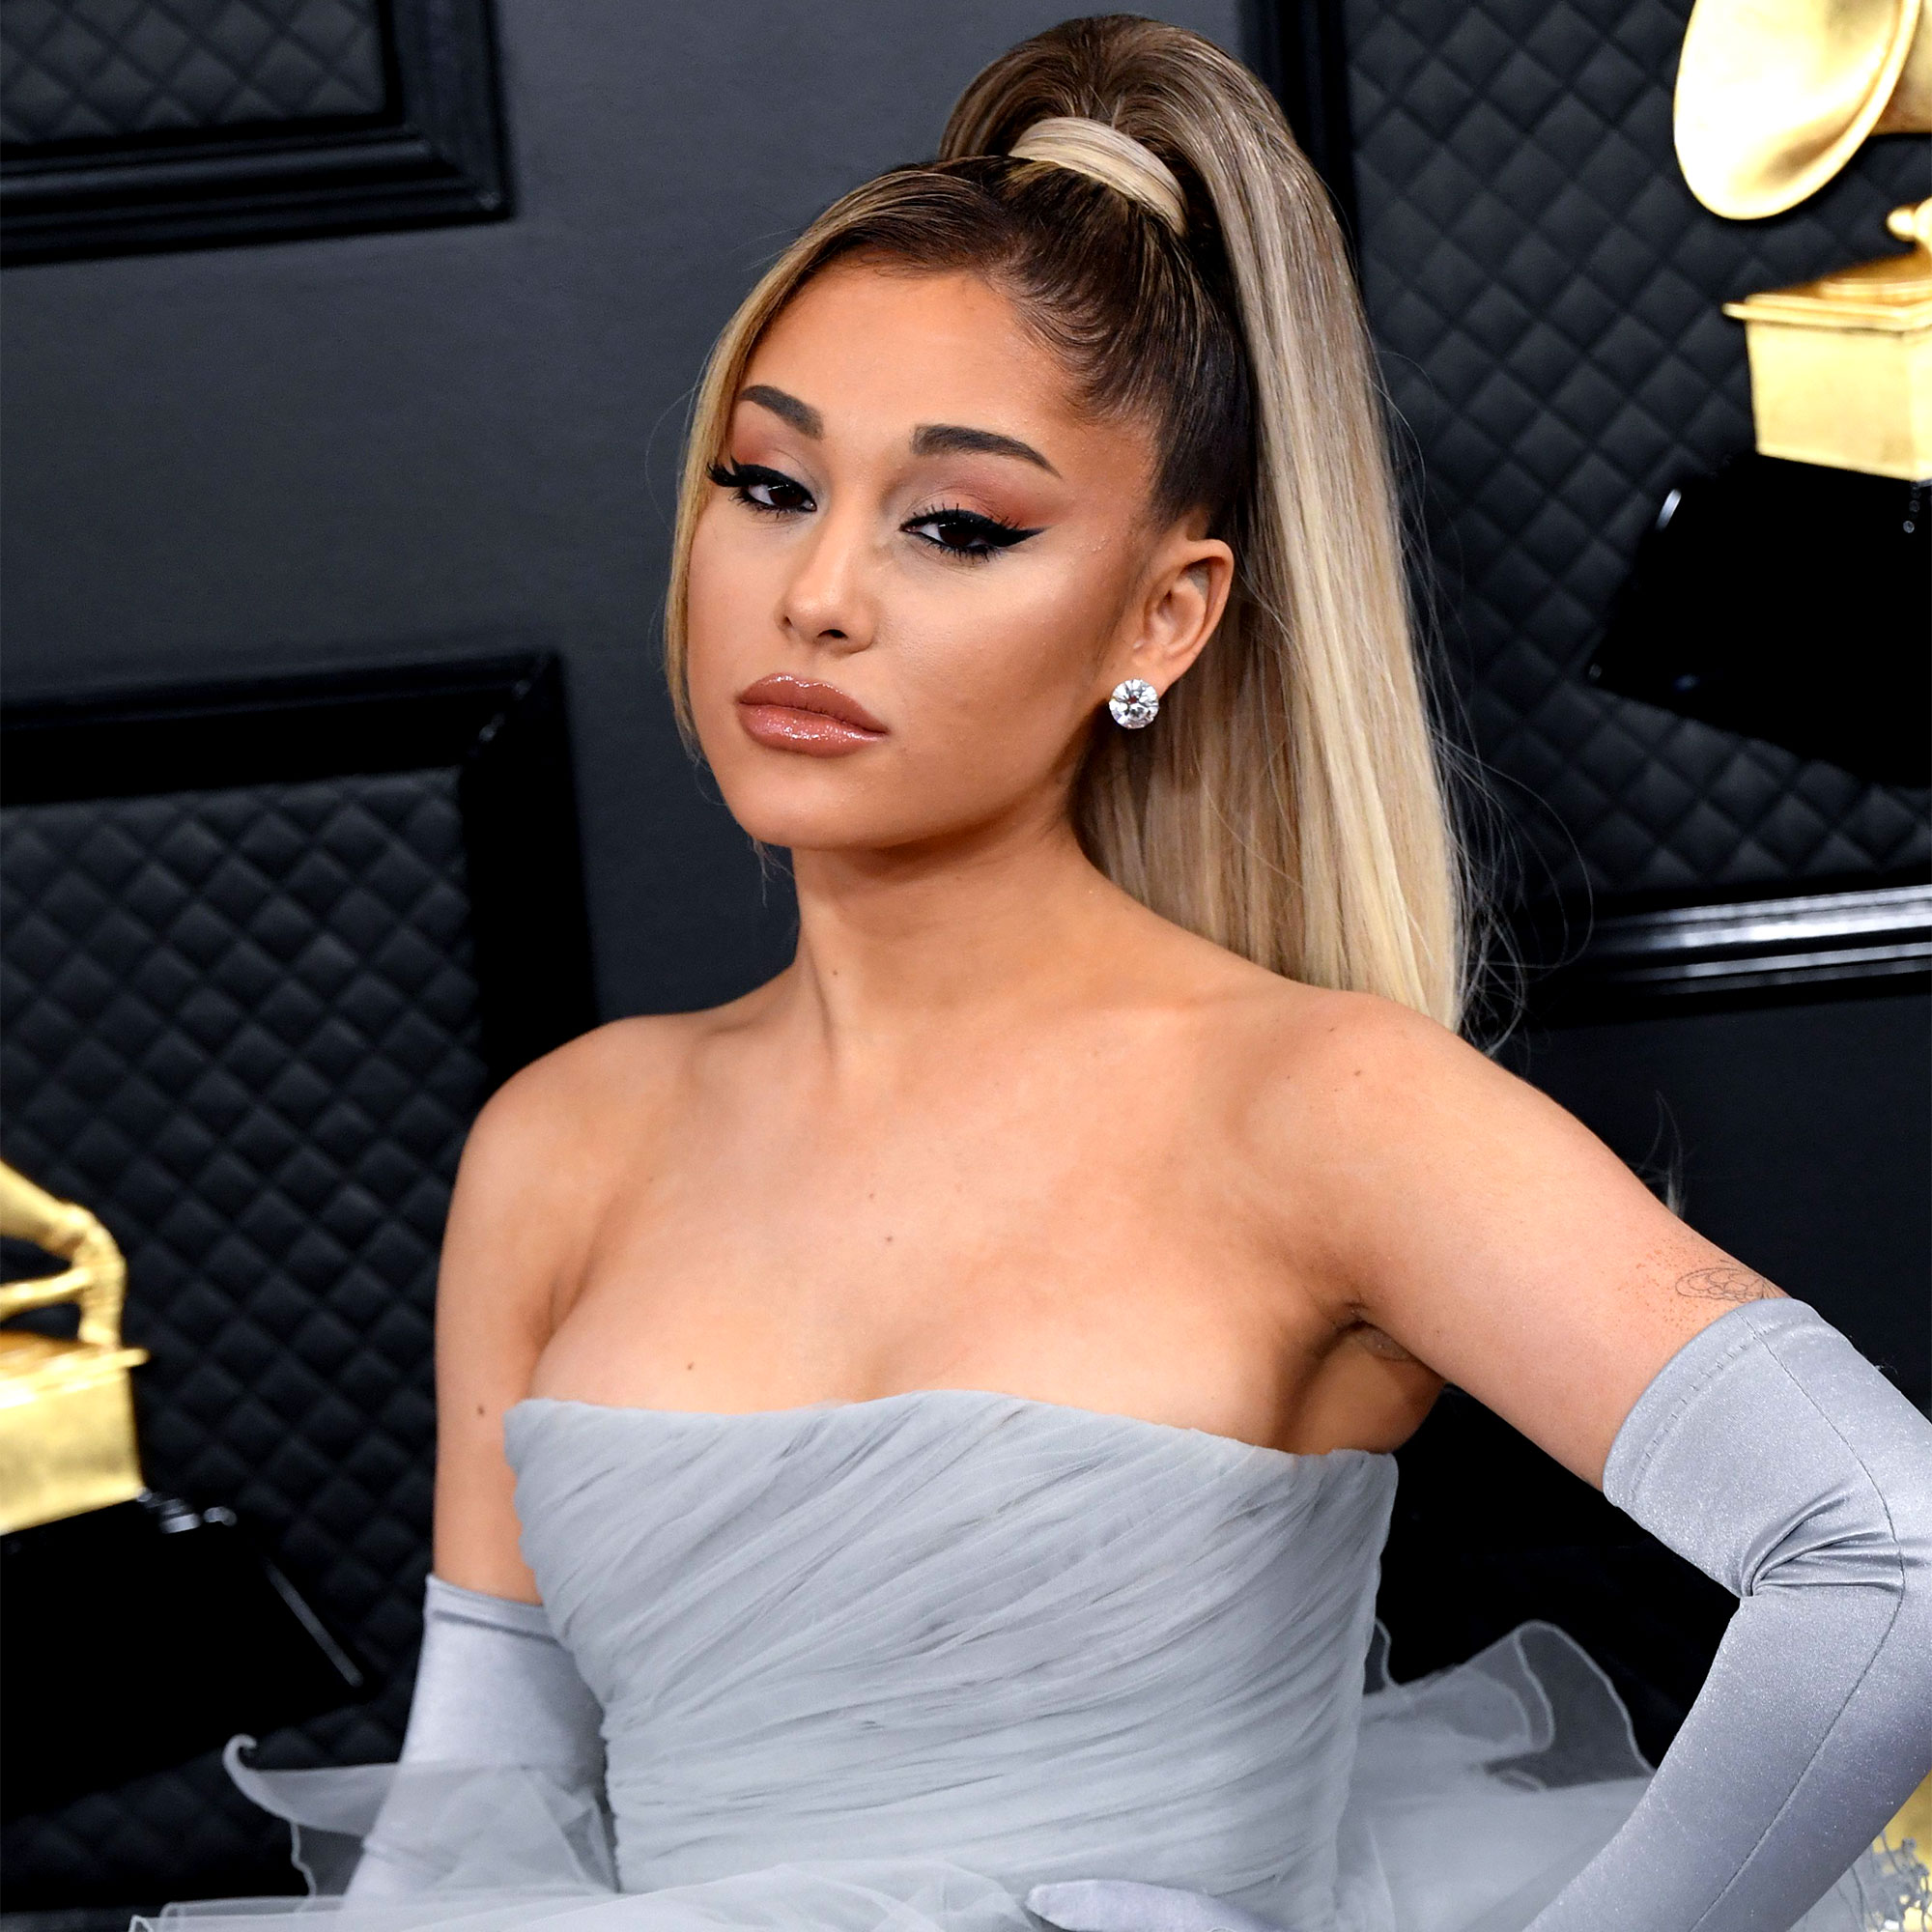 'Excuse Me'! Ariana Grande's Blonde Transformation Has Fans in a Frenzy